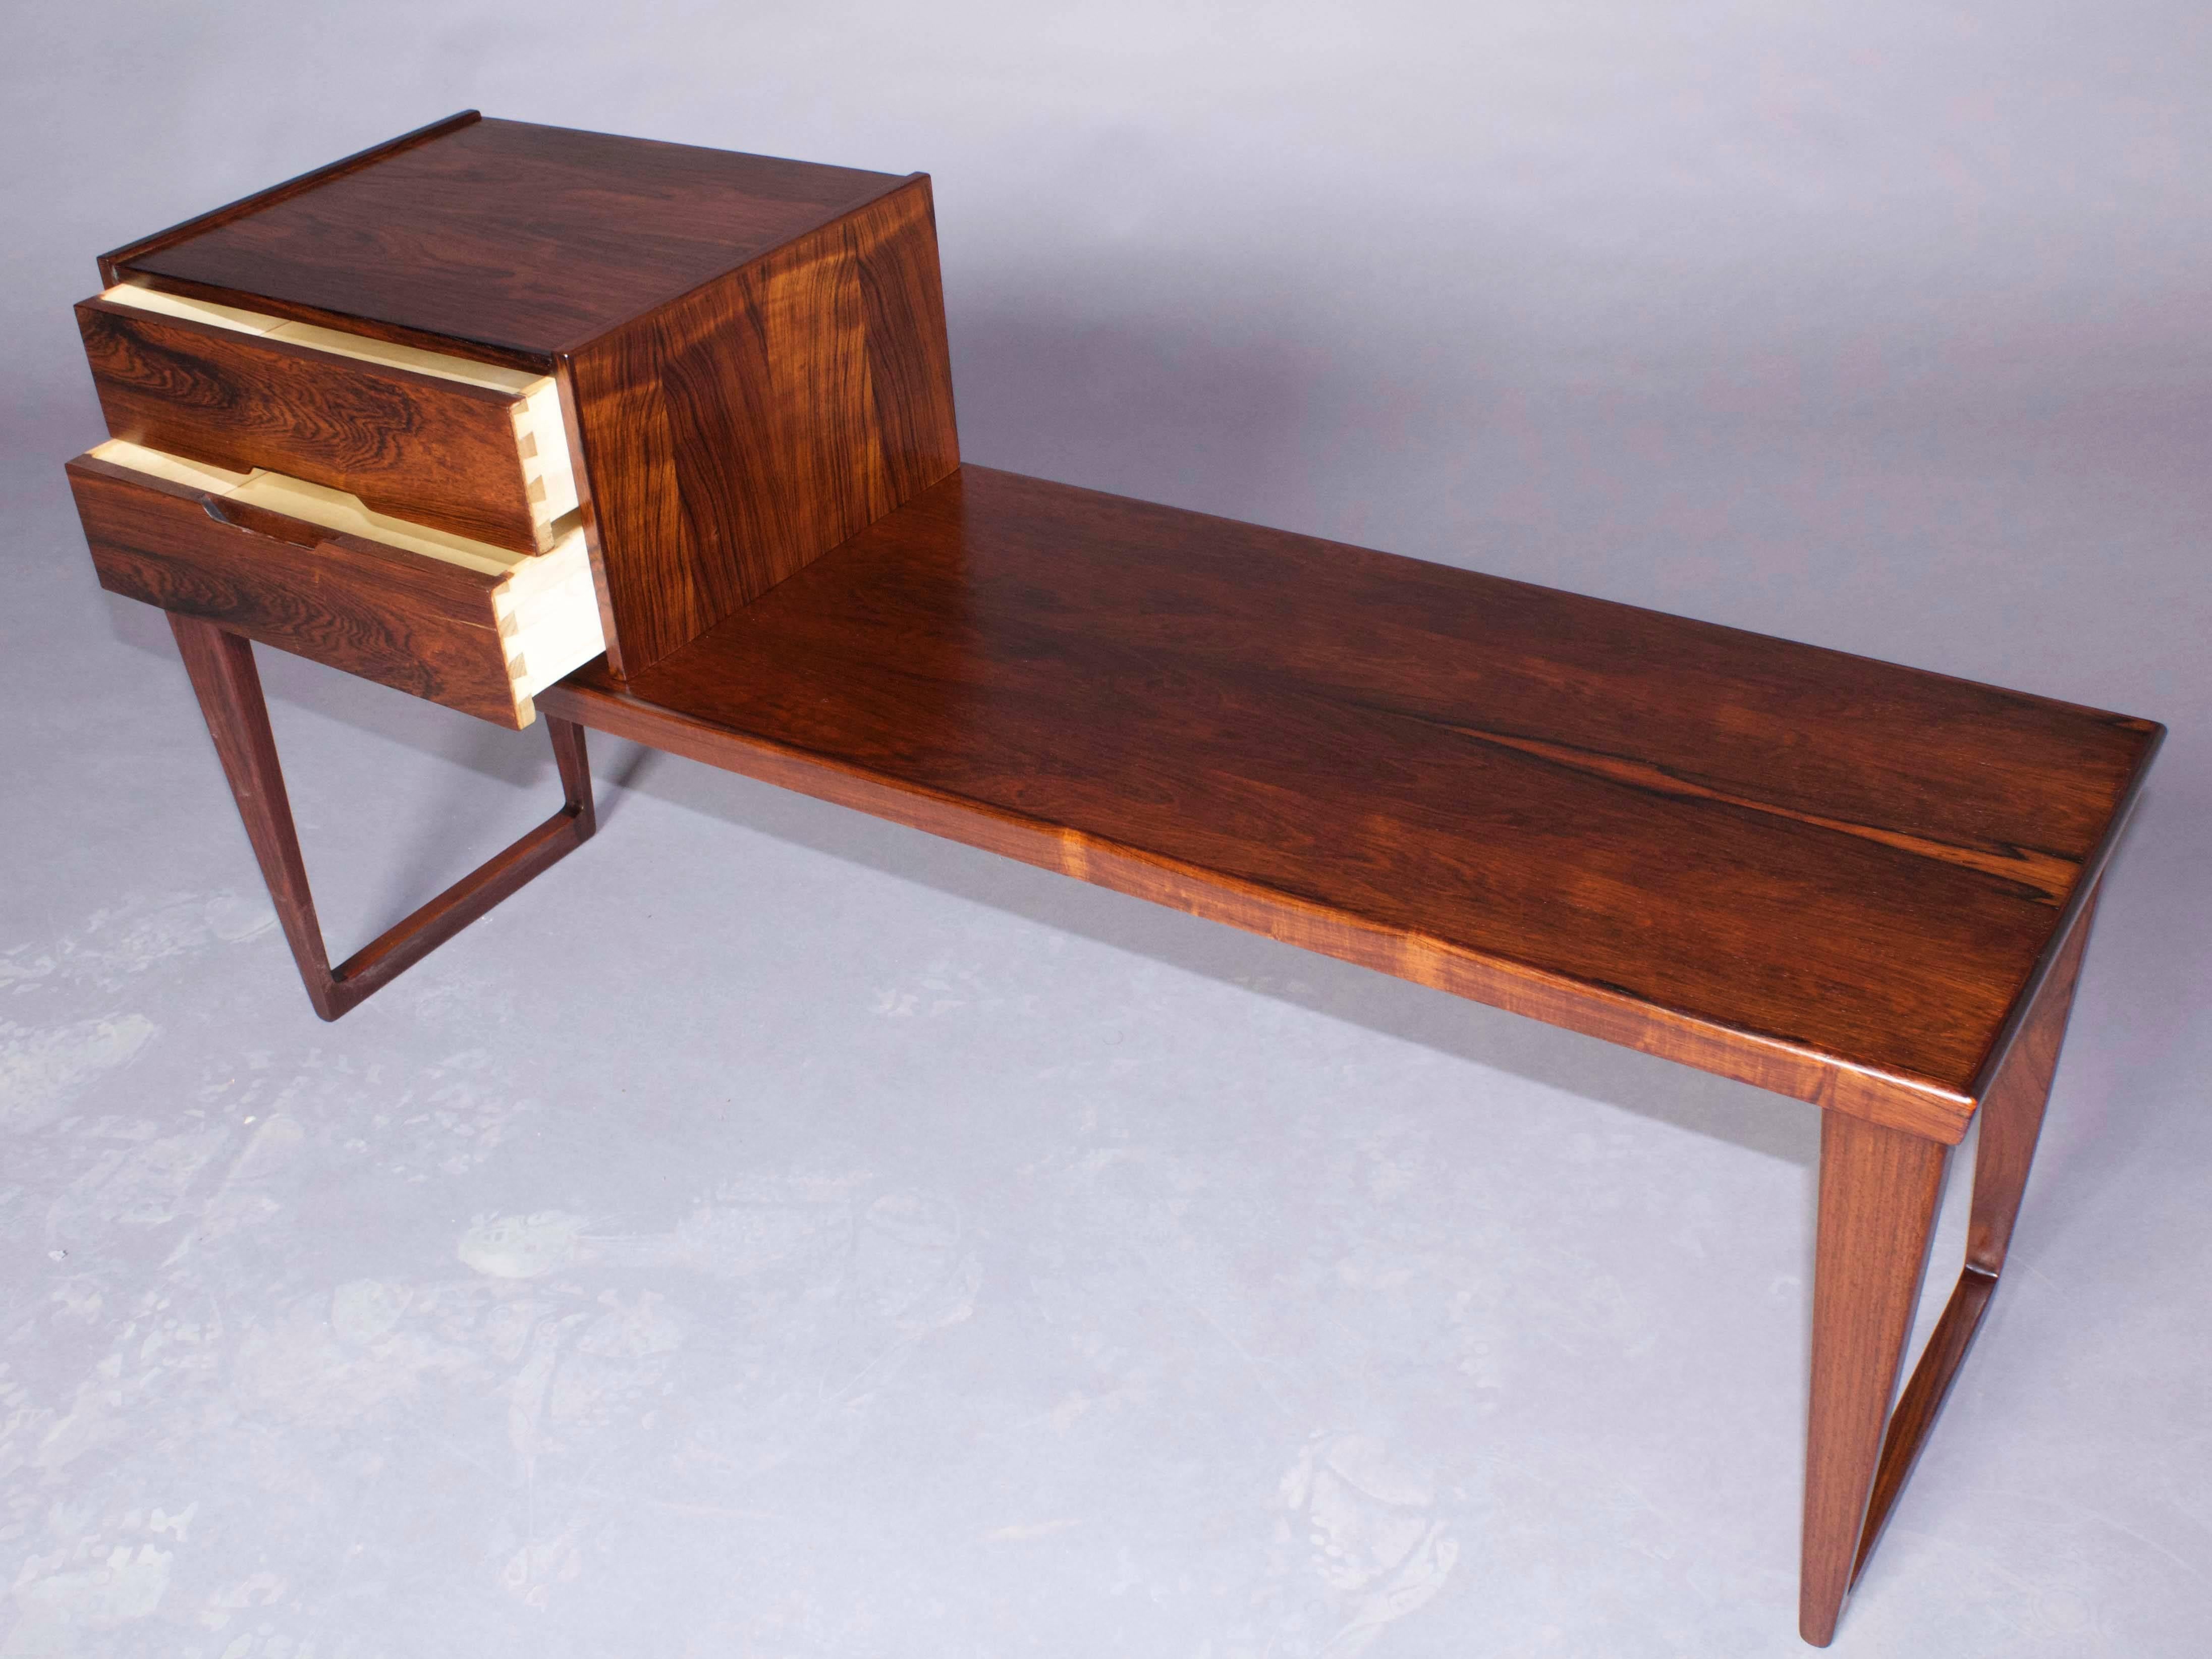 Vintage 1960s Bench by Aksel Kjersgaard.

Rosewood bench designed by Aksel Kjersgaard for Odder Furniture. The drawer unit that you see is removable and can be placed on the right side, middle or left side of the bench. This item will look perfect